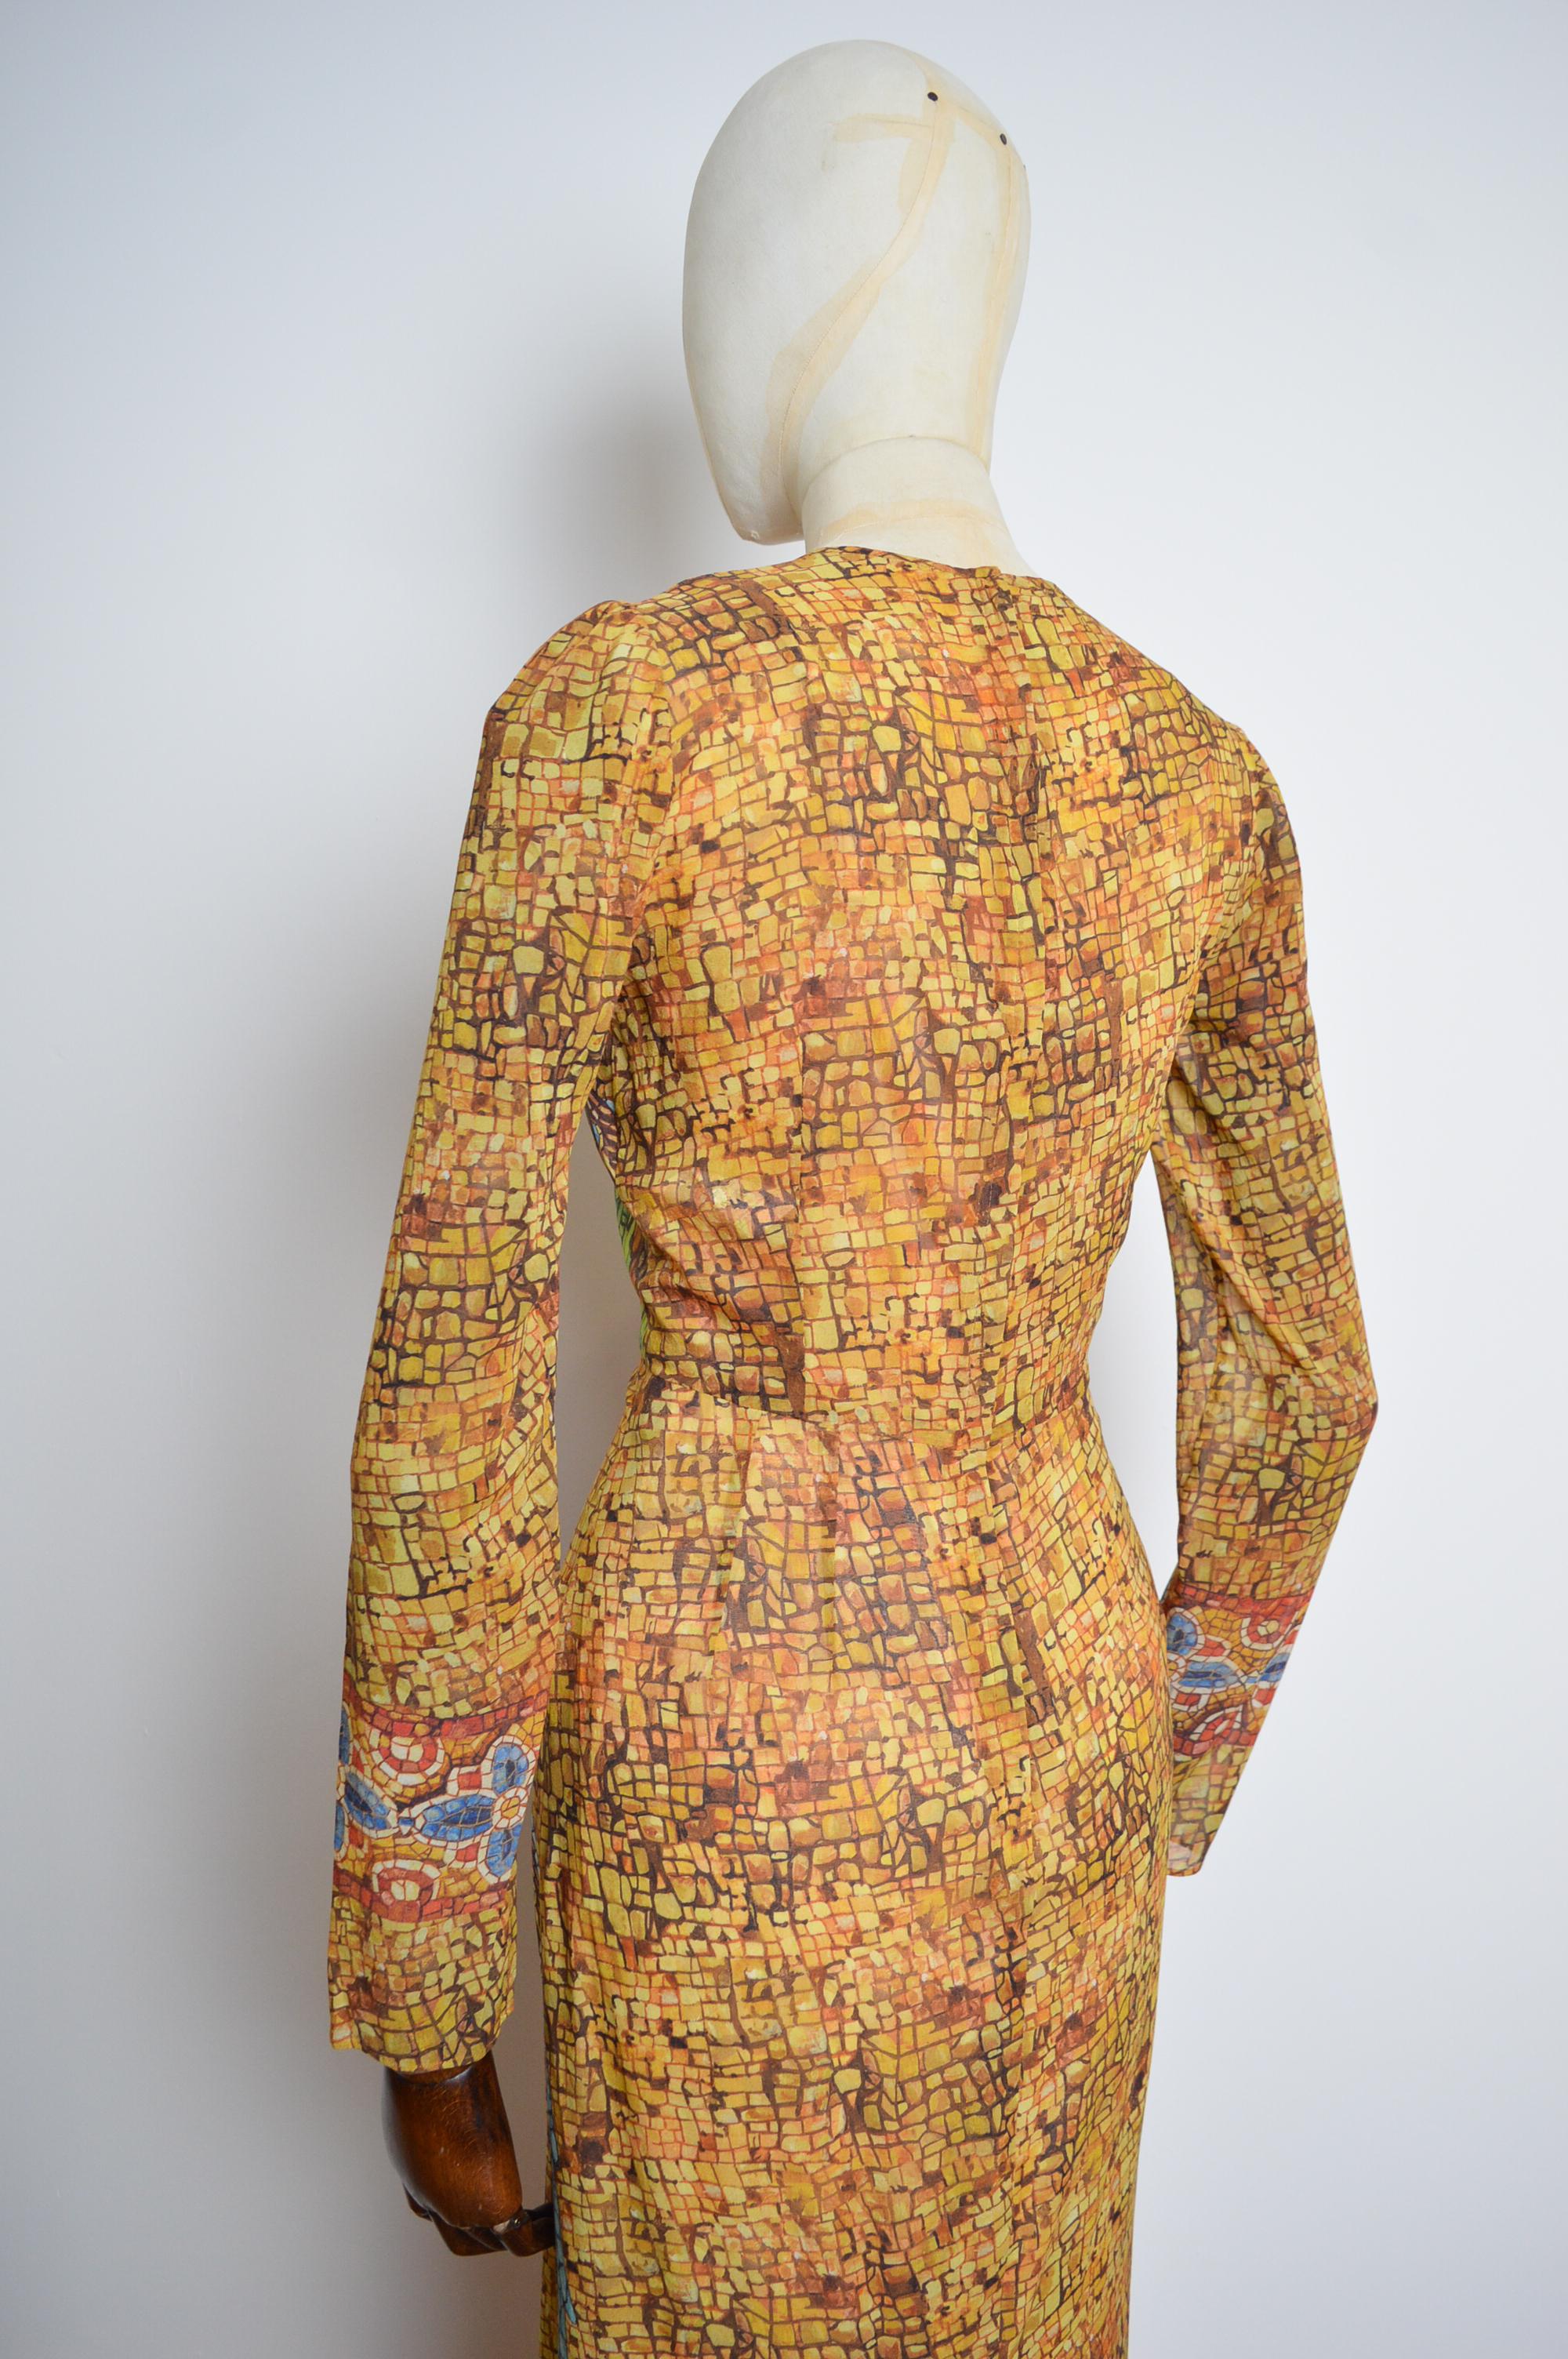 Fall / Winter 2013 DOLCE & GABBANA Runway Mosaic Stain Glass Antique Print Dress In Good Condition For Sale In Sheffield, GB